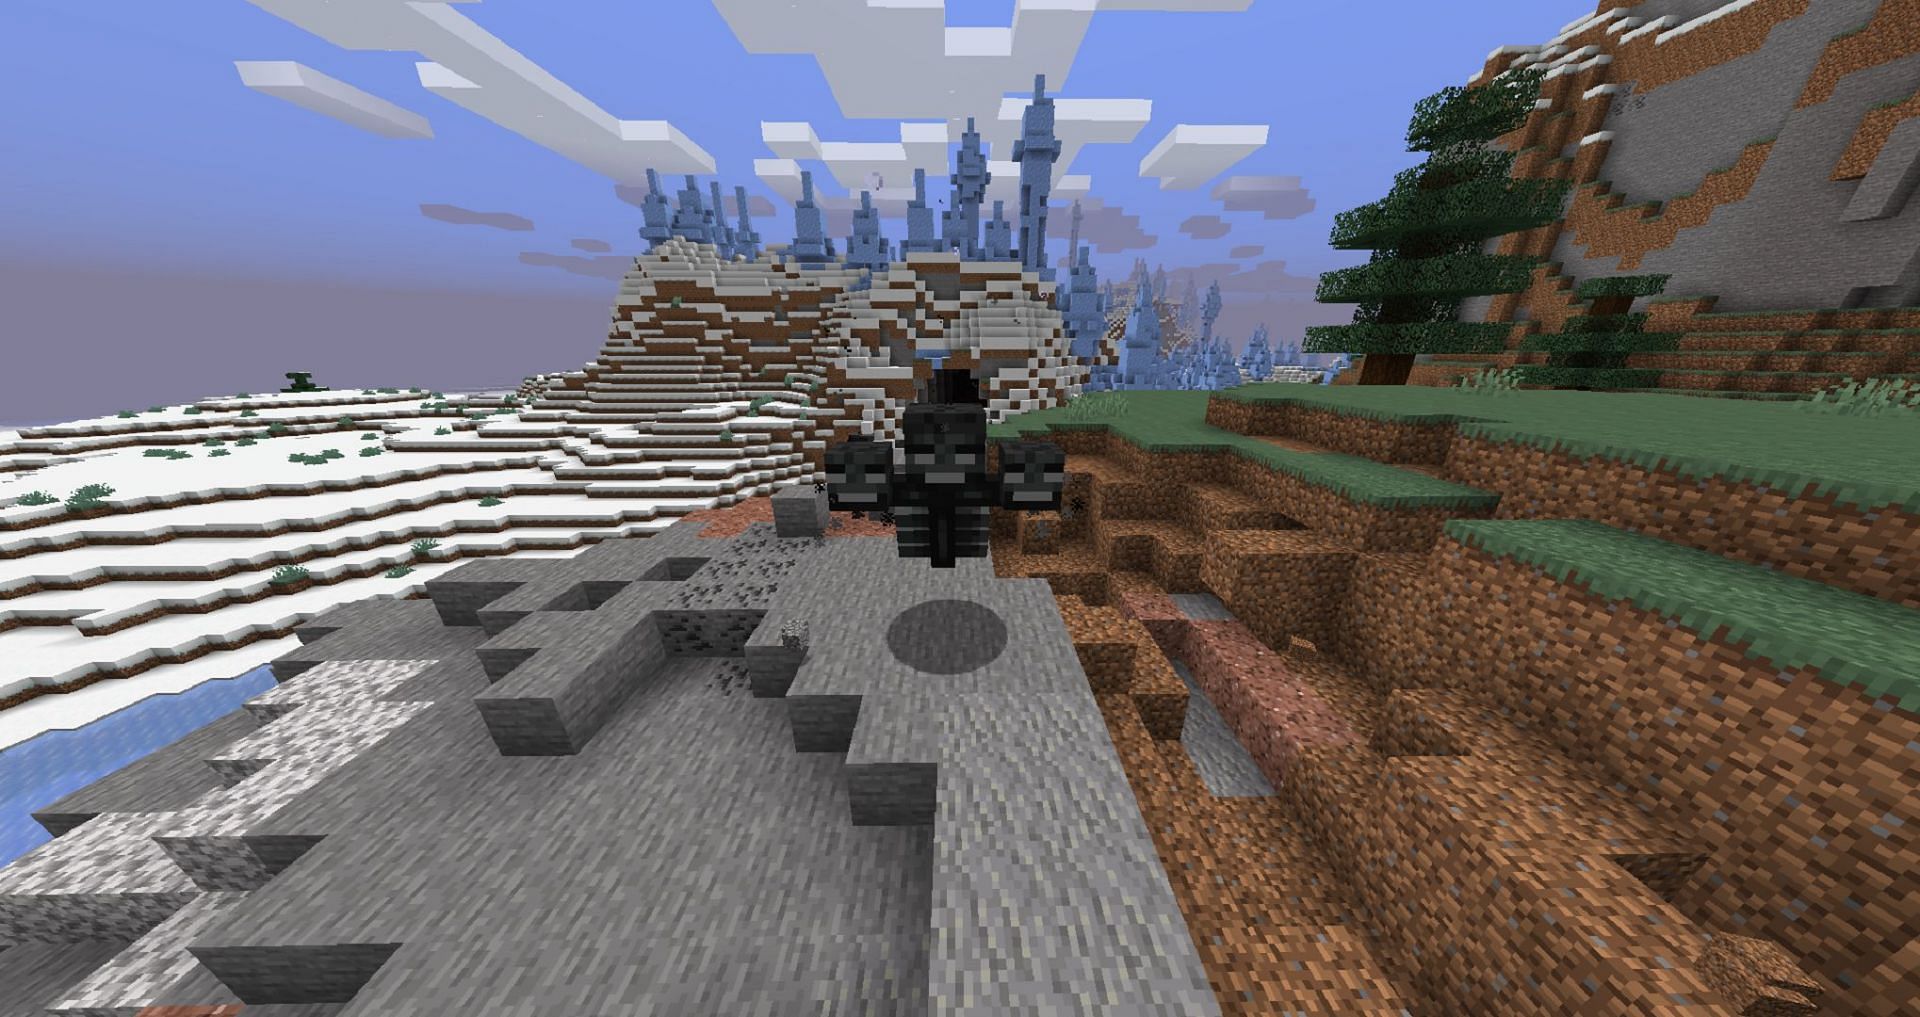 Minecraft&#039;s Wither boss is much more fearsome in Bedrock (Image via Mojang)